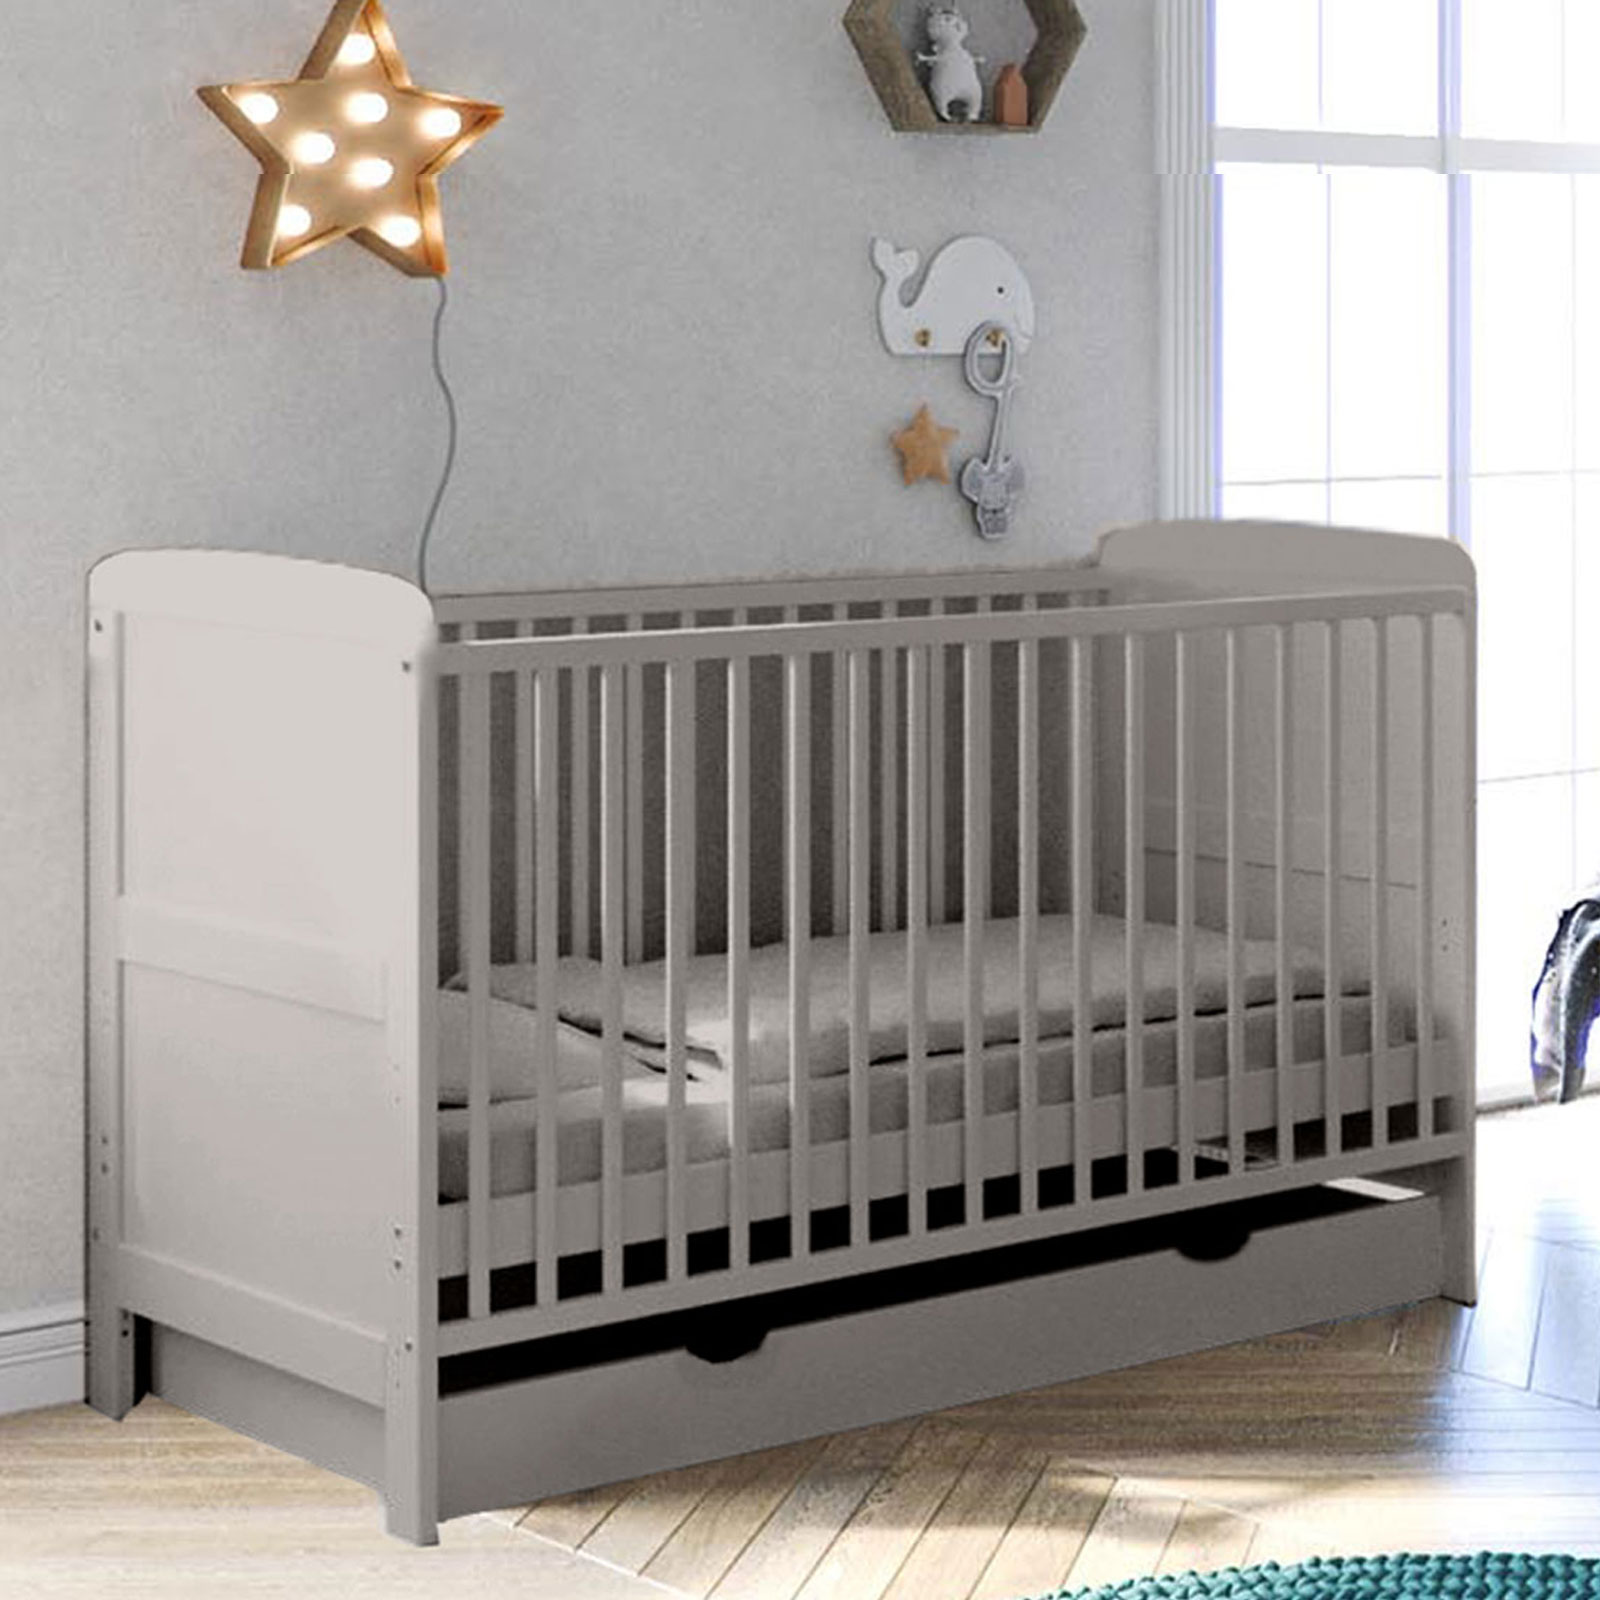 Puggle Henbury Cot Bed With Maxi Air Cool Mattress - Classic Grey